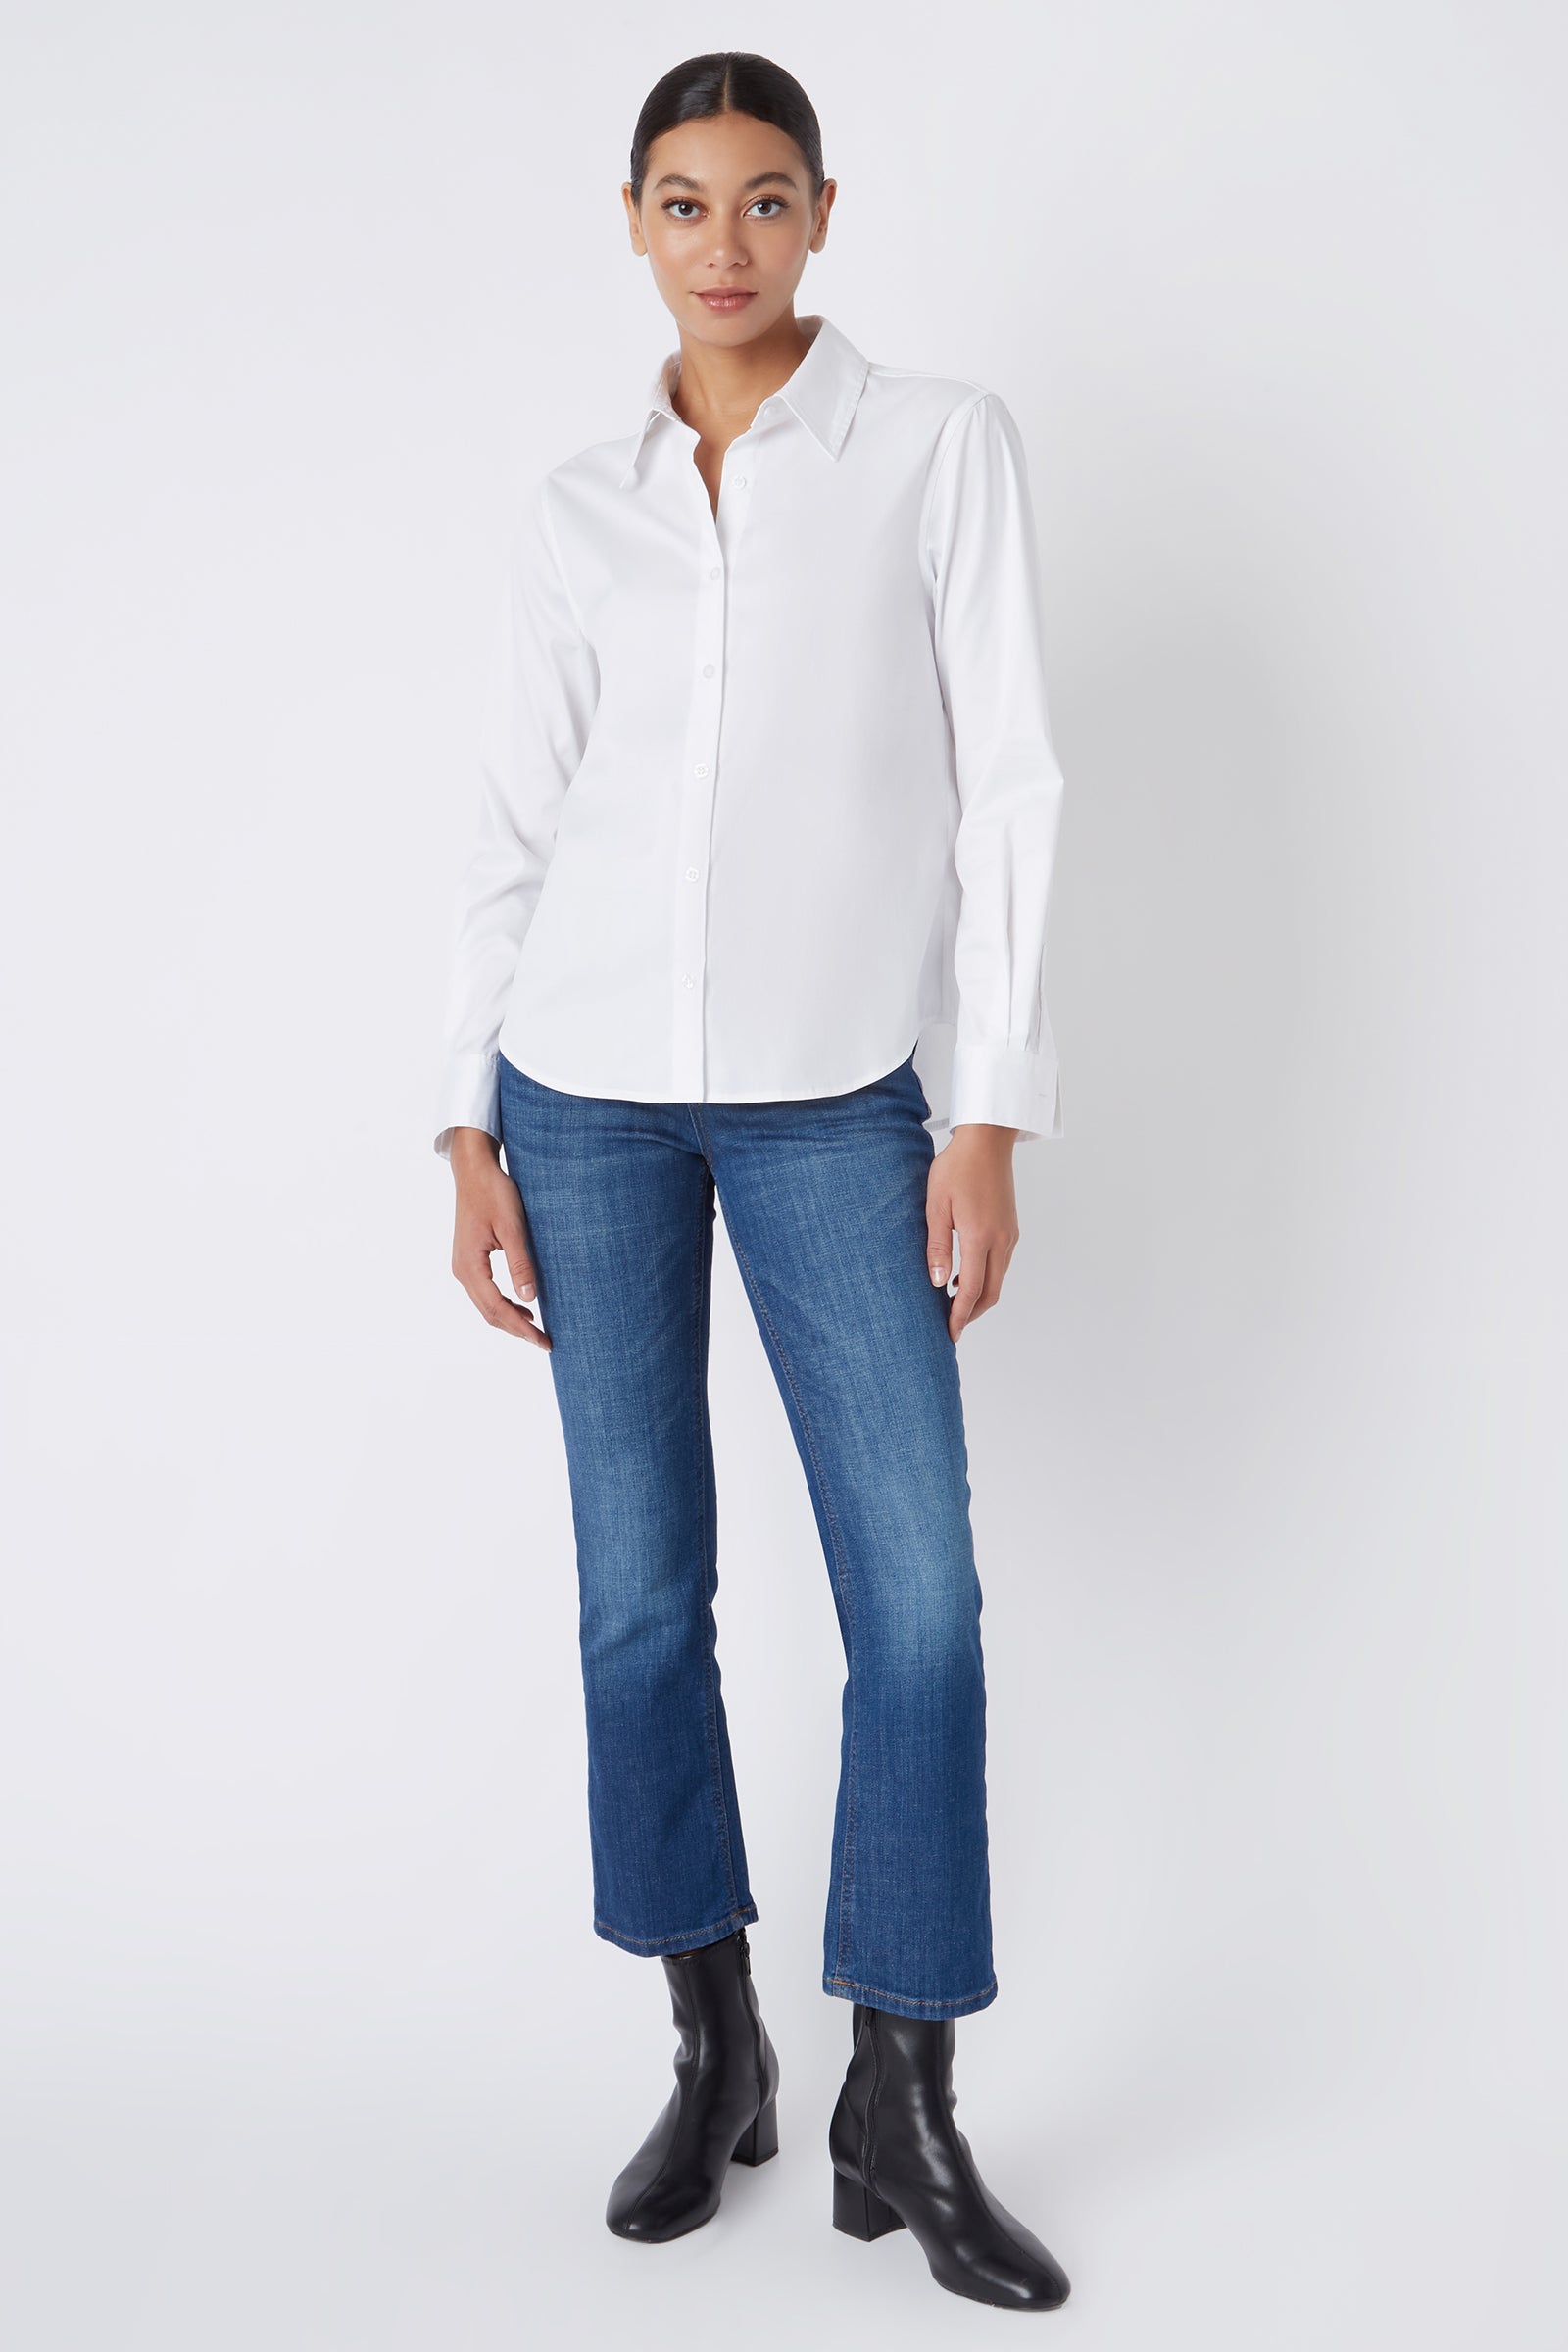 Kal Rieman Classic Tailored Shirt in White Pinpoint Oxford on Model Full Front View